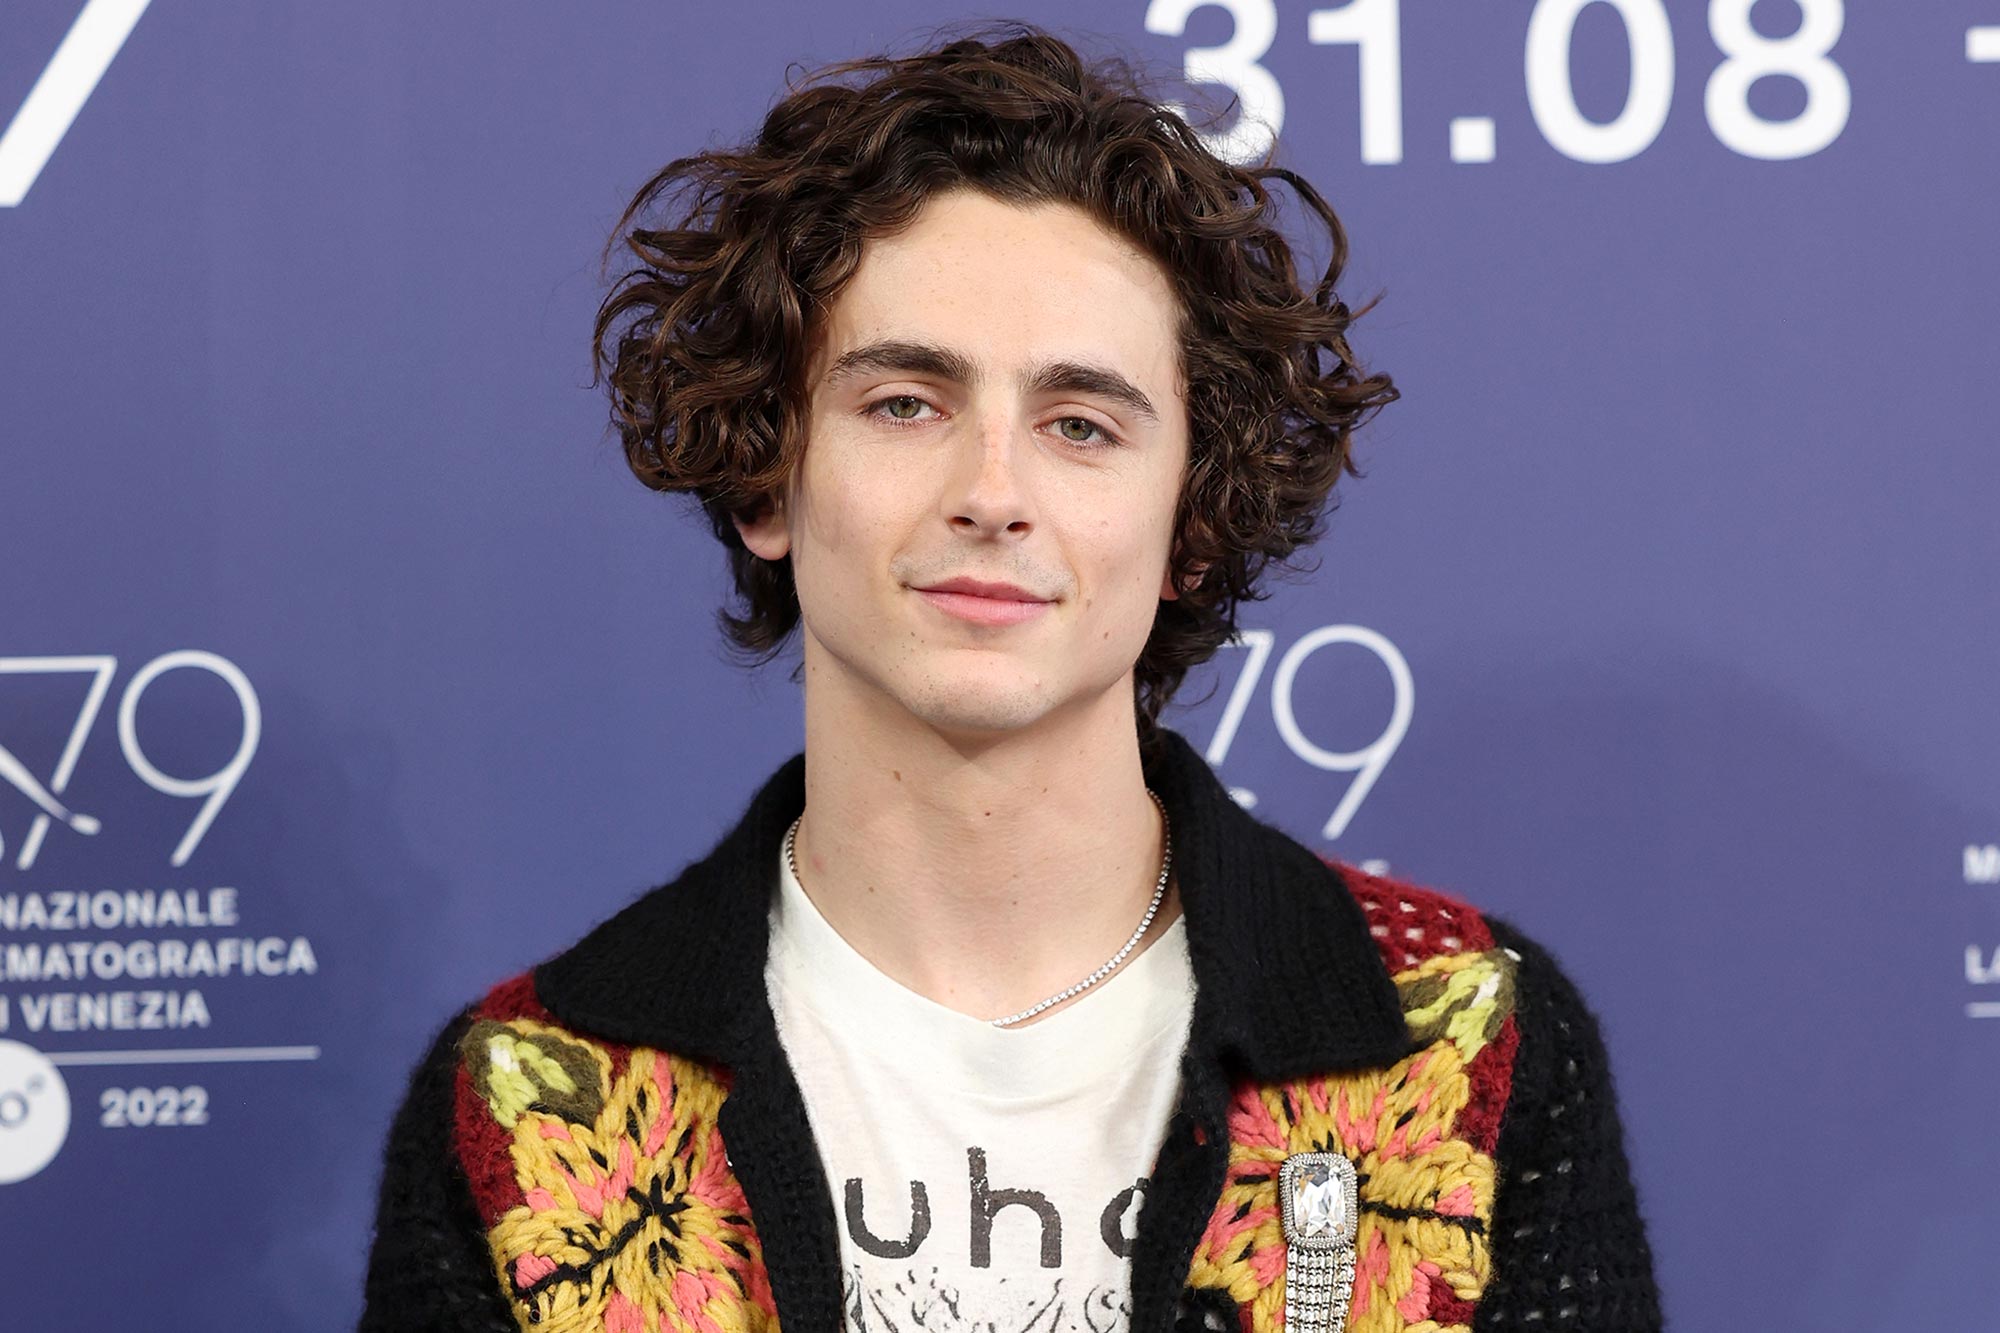 Timothée Chalamet attends the photocall for "Bones And All" at the 79th Venice International Film Festival on September 02, 2022 in Venice, Italy.